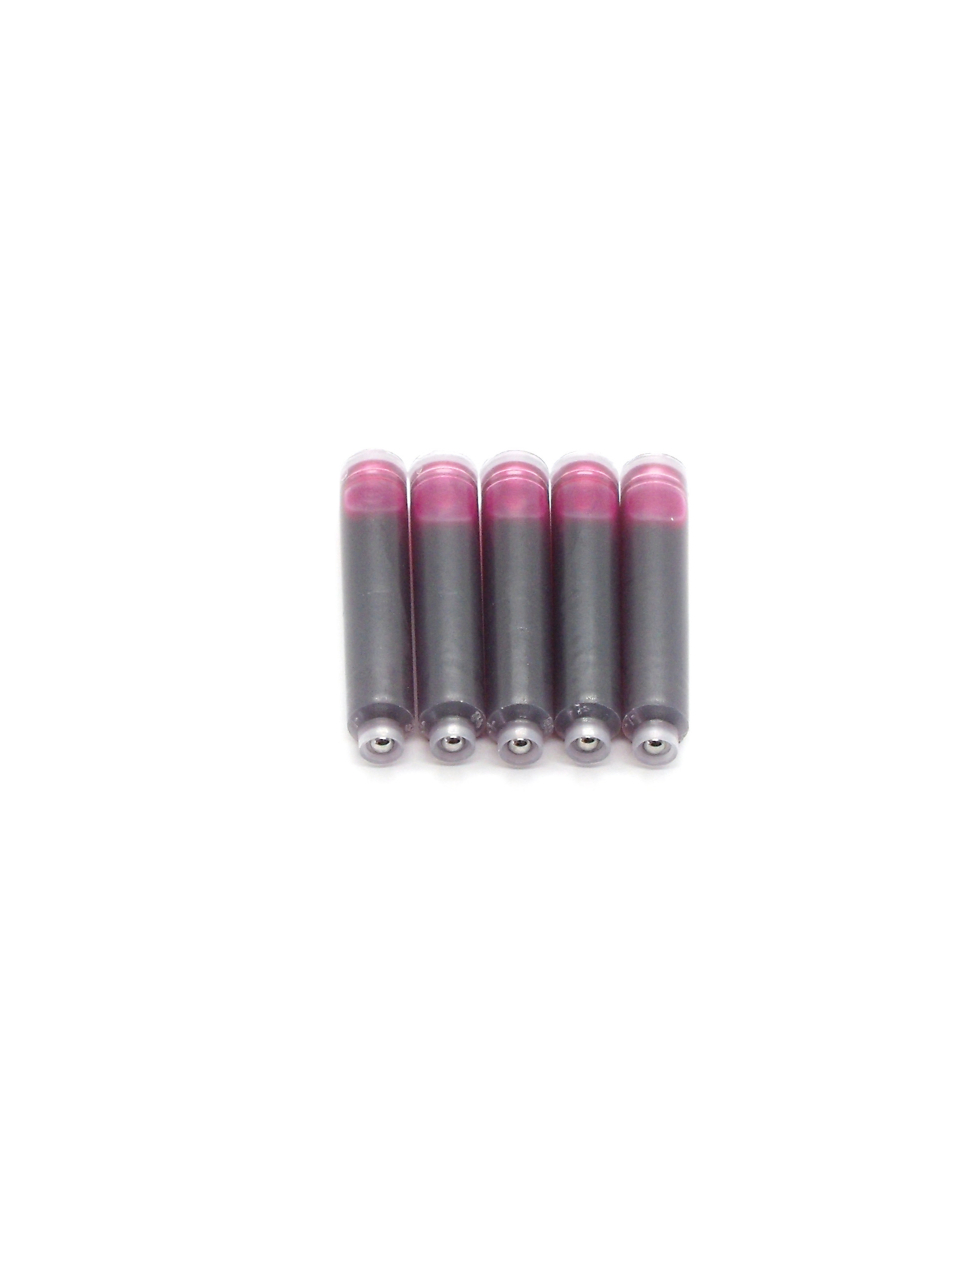 Top Ink Cartridges For Online Fountain Pens (Pink)